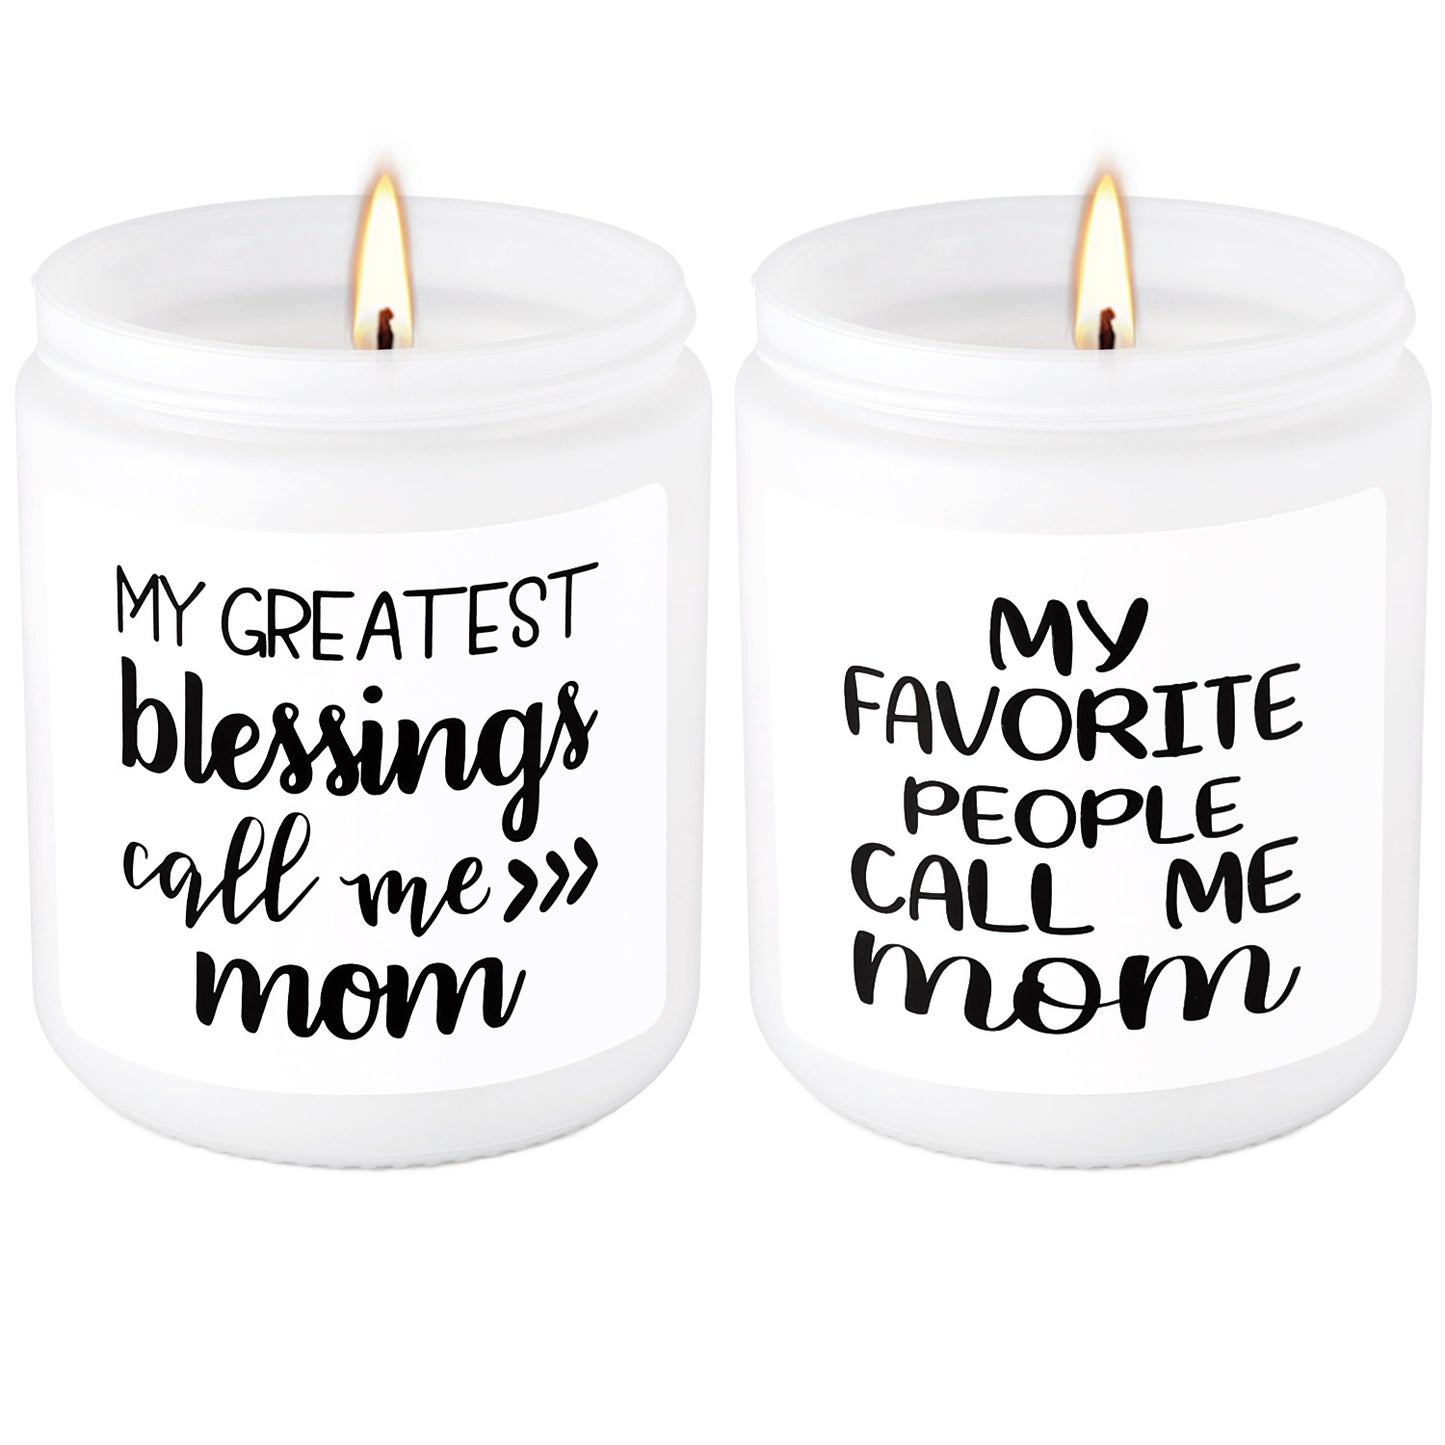 Aroma Candle Mother's Day Gift